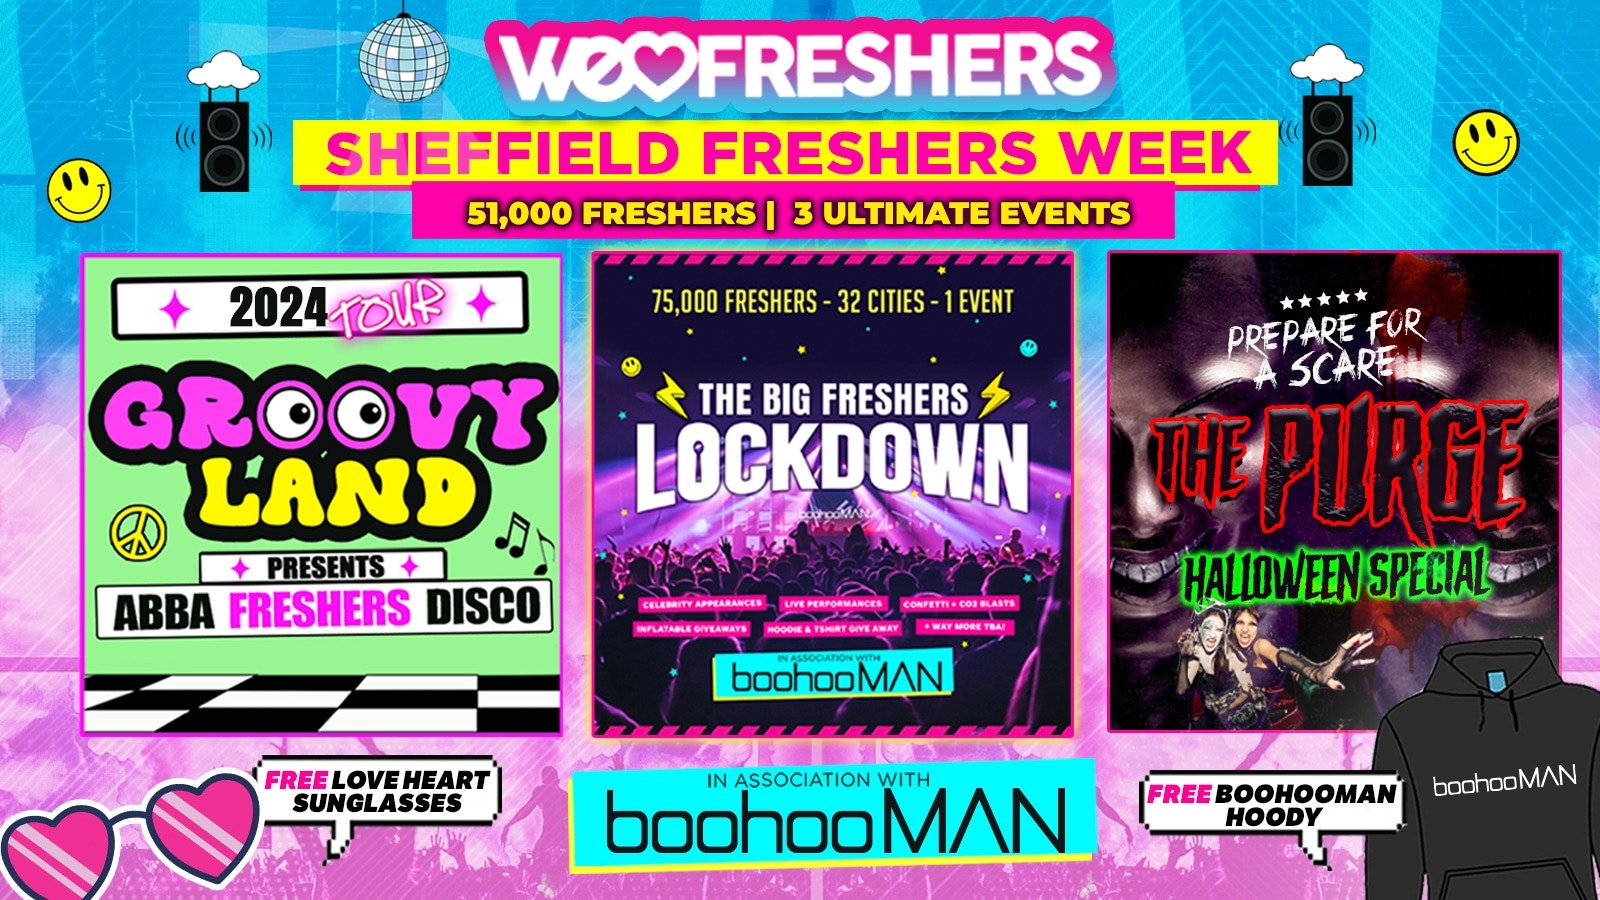 WE LOVE SHEFFIELD FRESHERS 2024 in association with boohooMAN ❗3 EVENTS ❗